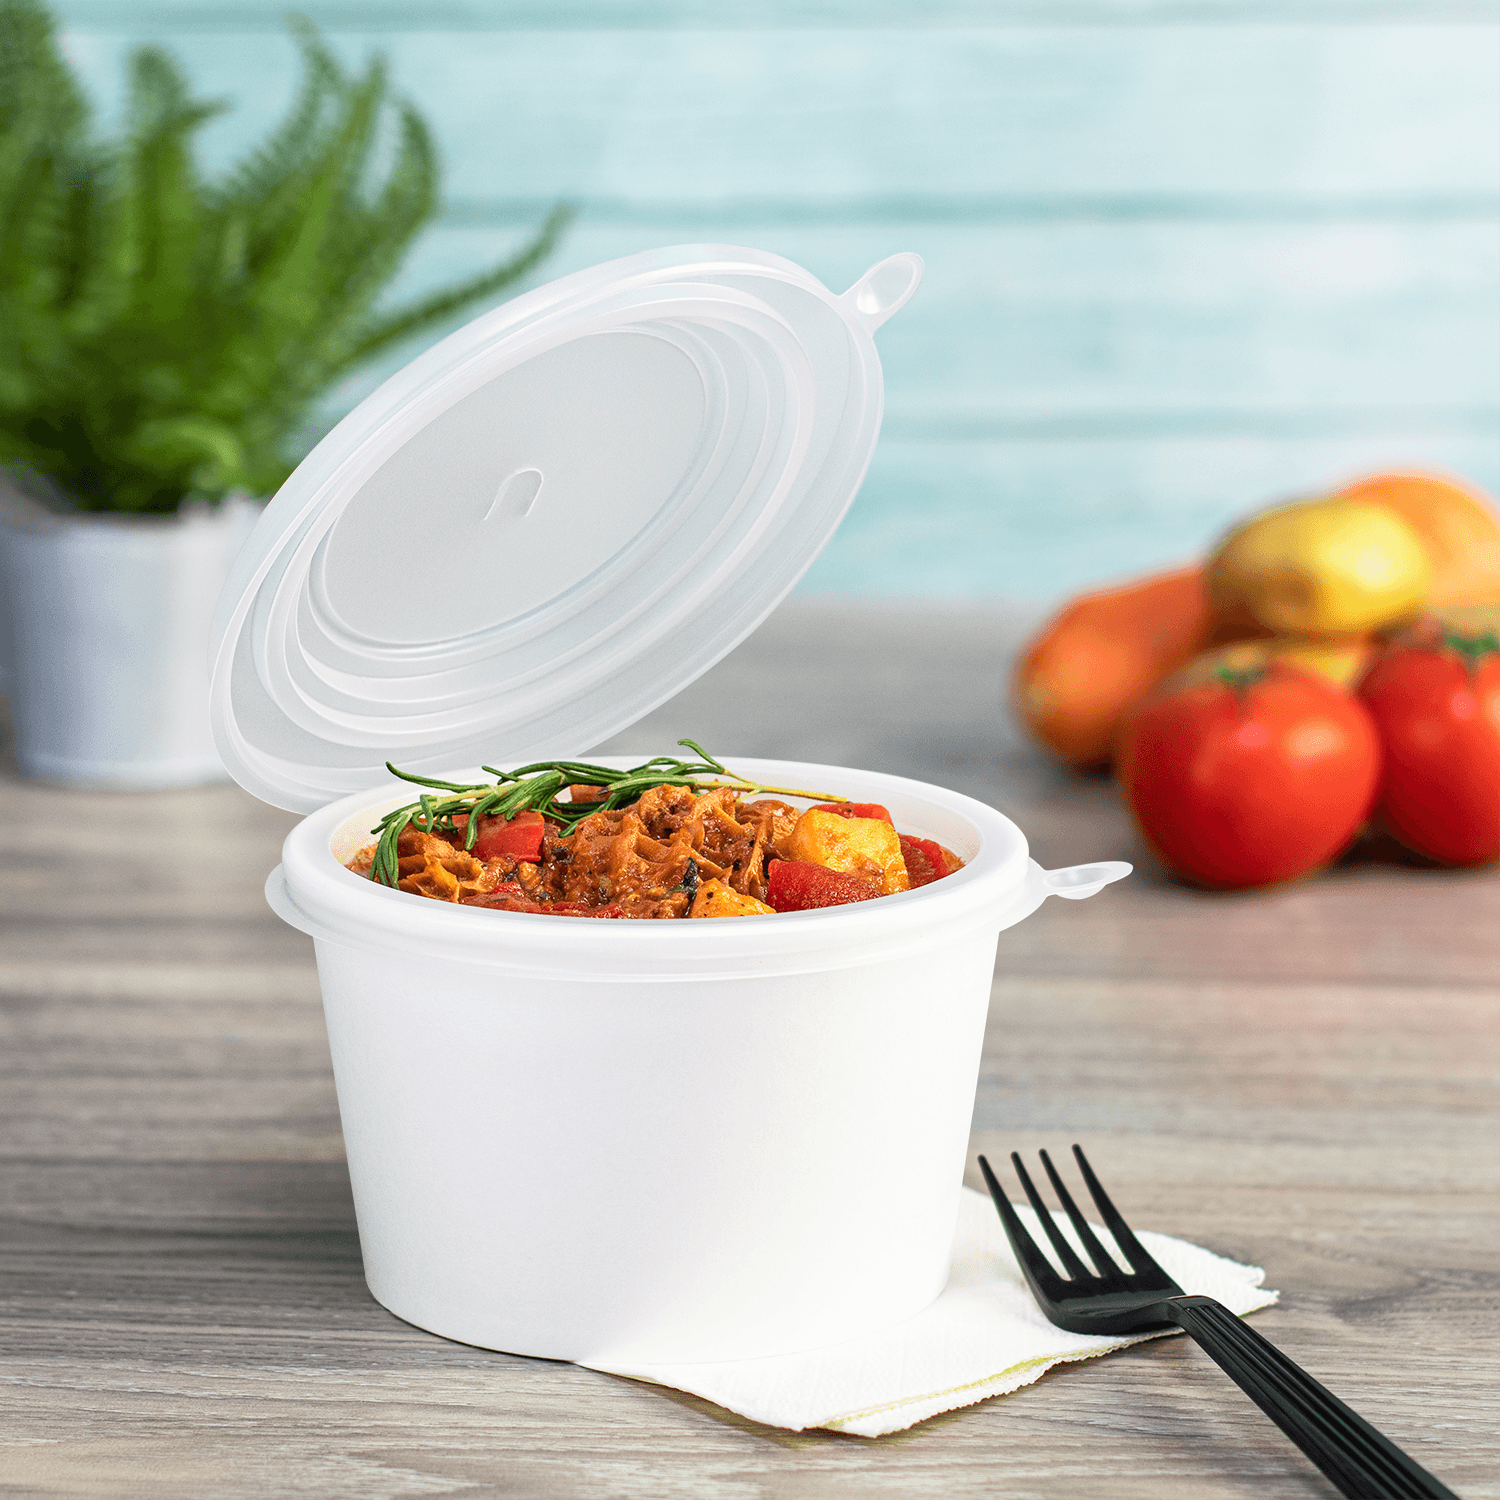 Clear Karat 16 oz PP Hinged Insert for 24-32 oz Paper Food Container with food